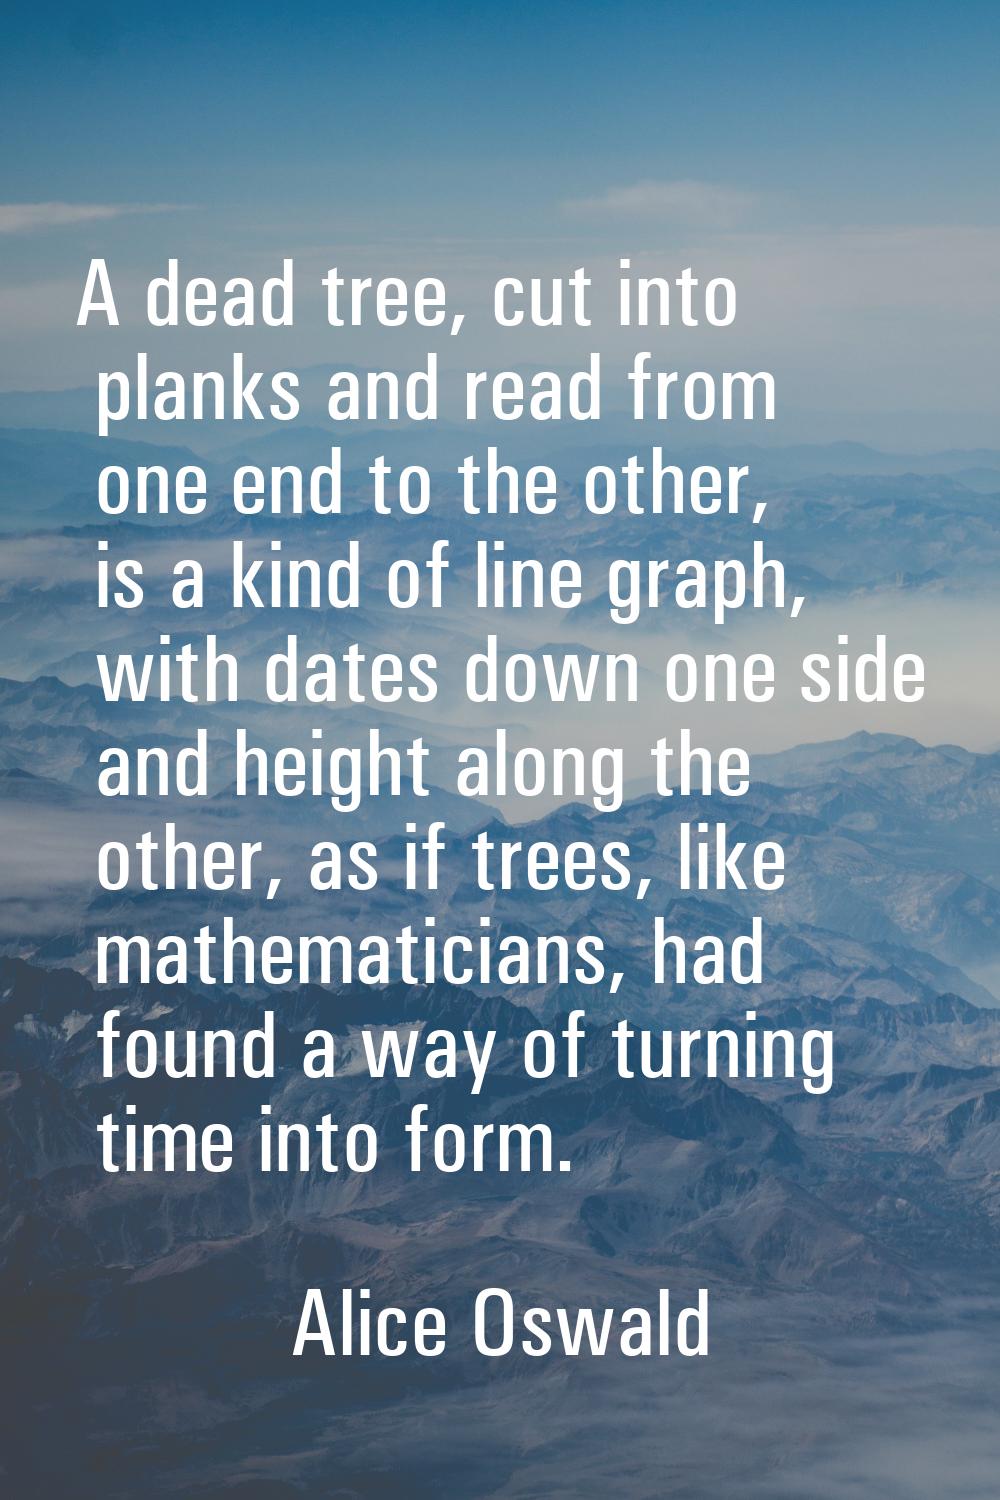 A dead tree, cut into planks and read from one end to the other, is a kind of line graph, with date